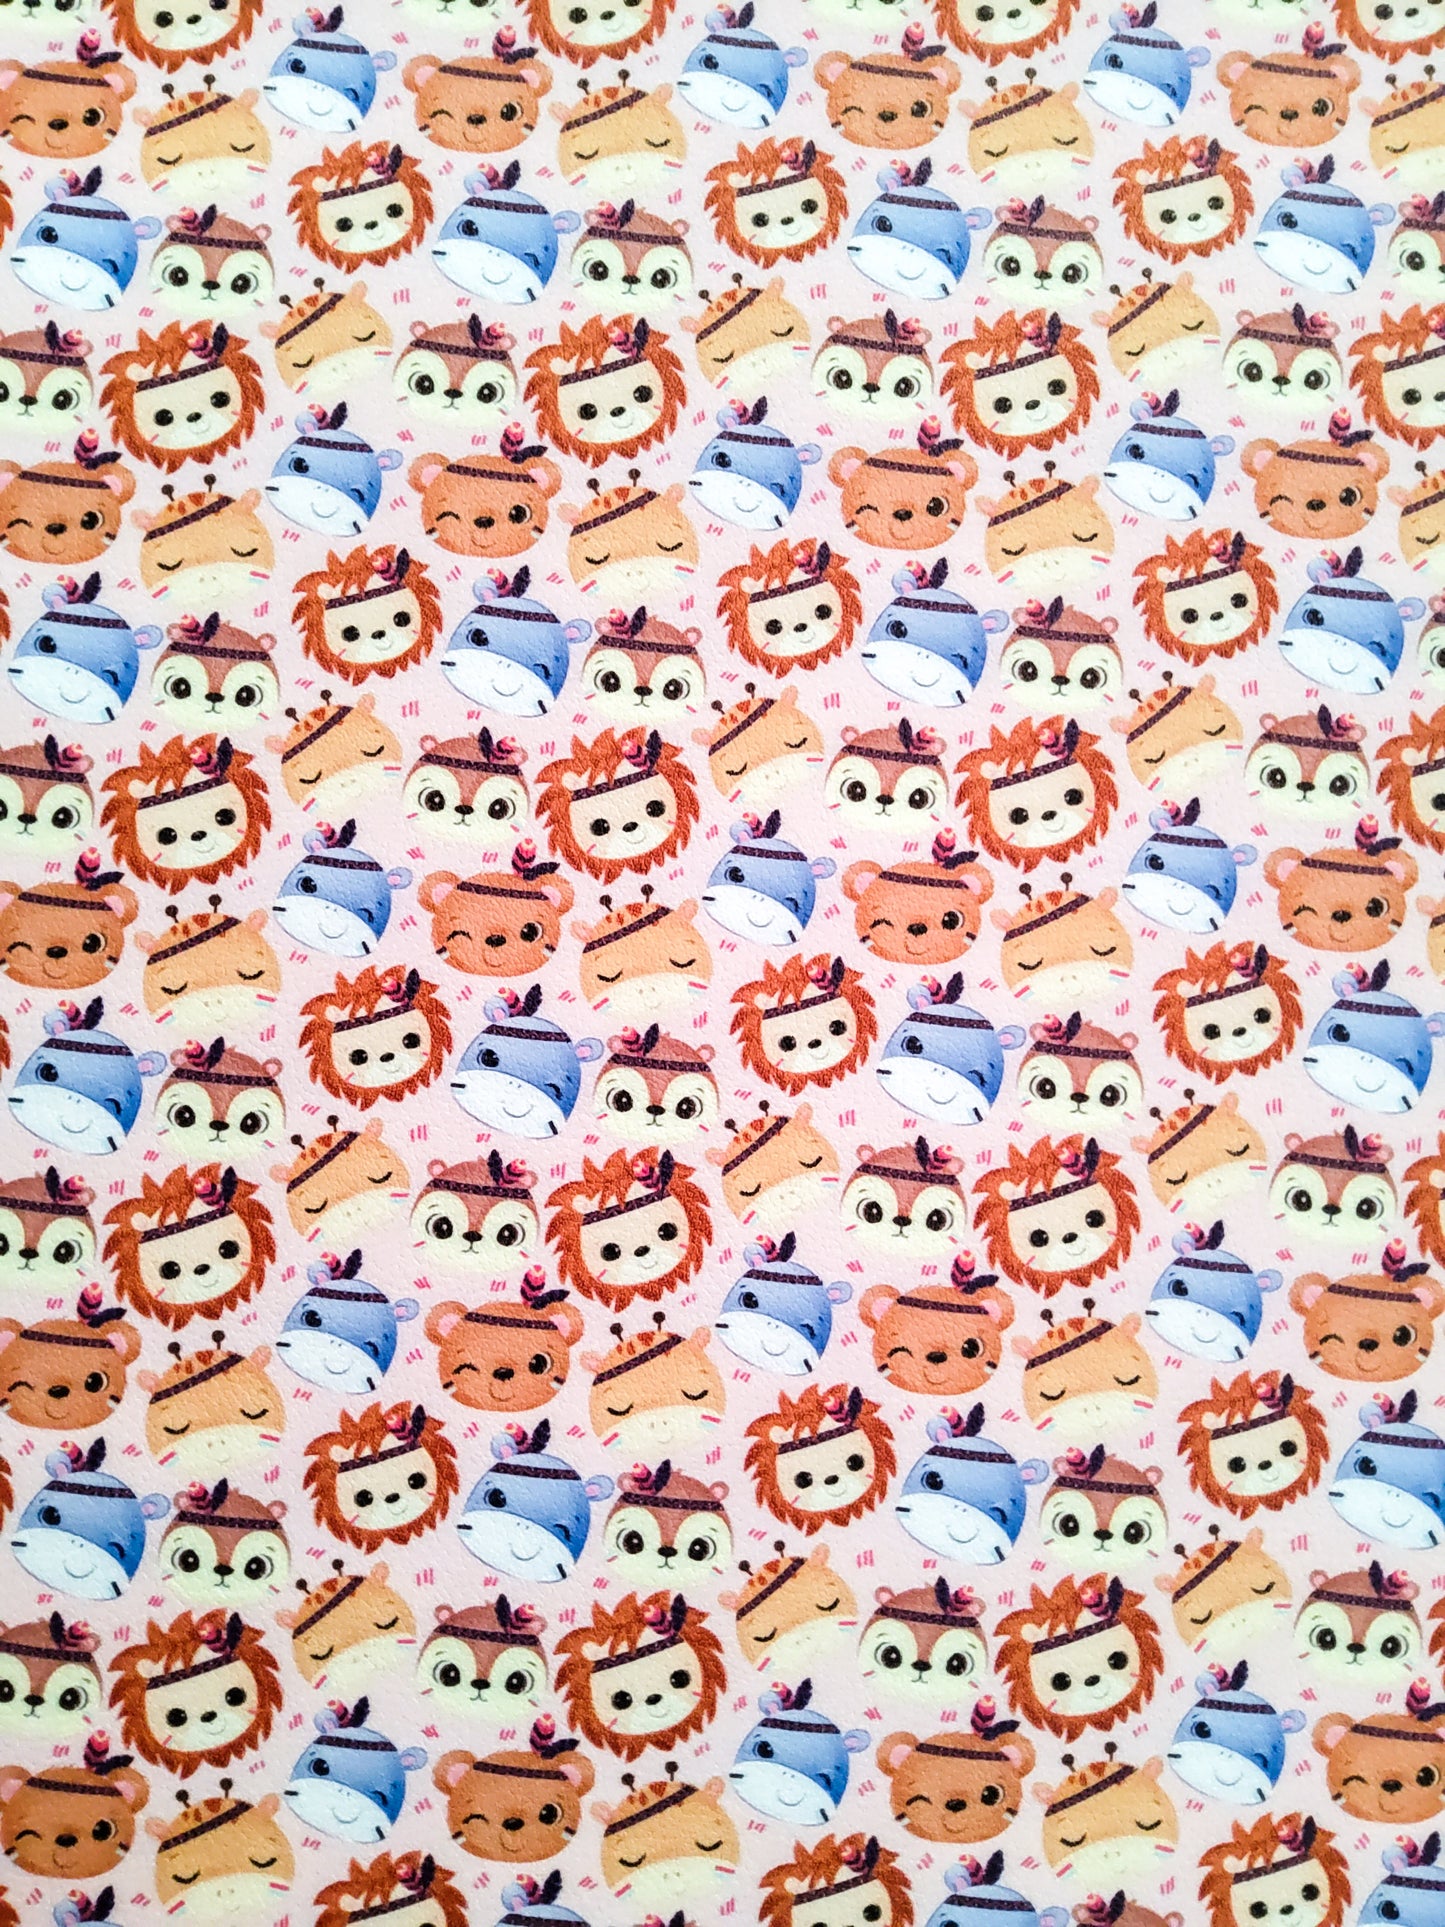 Cute Tribal Animal Faces 9x12 faux leather sheet